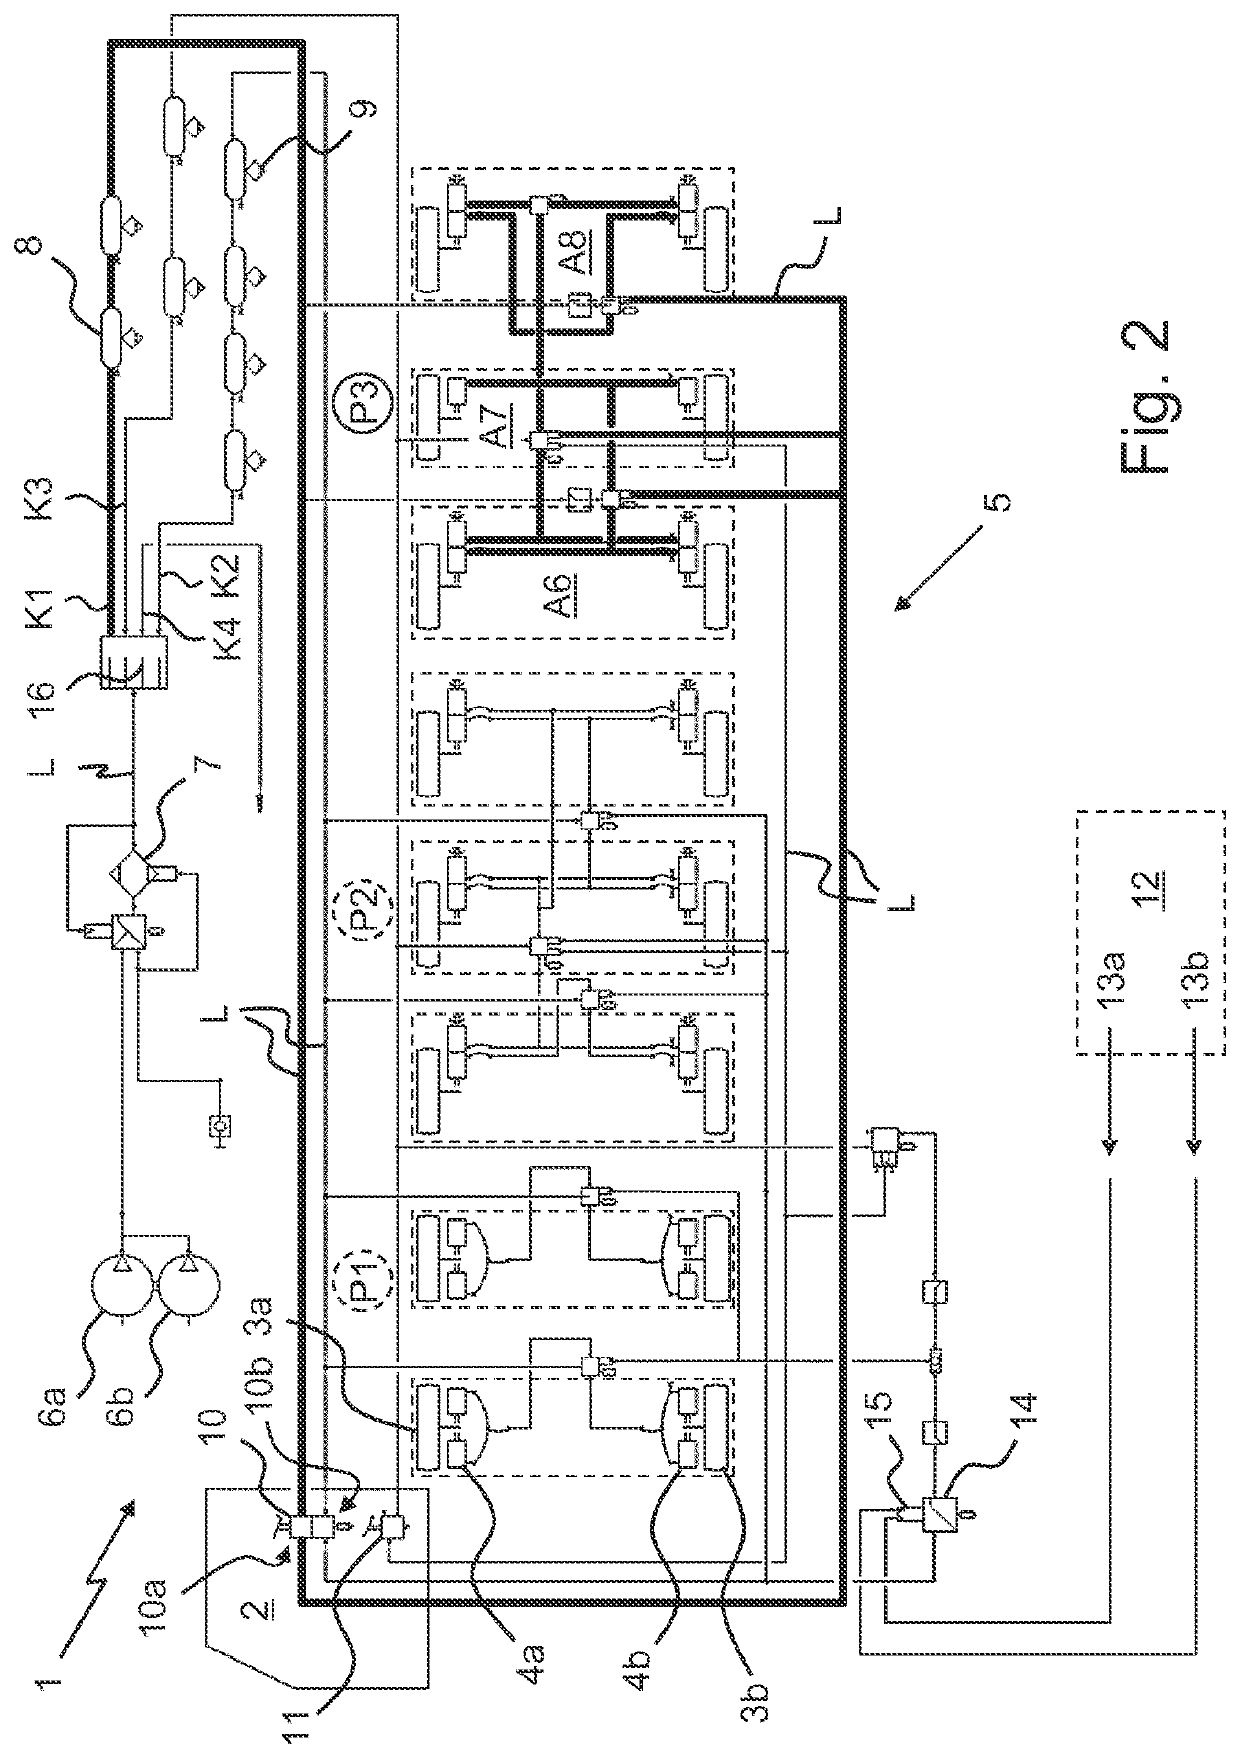 Vehicle crane having hydropneumatic suspension and a braking system comprising at least two braking circuits